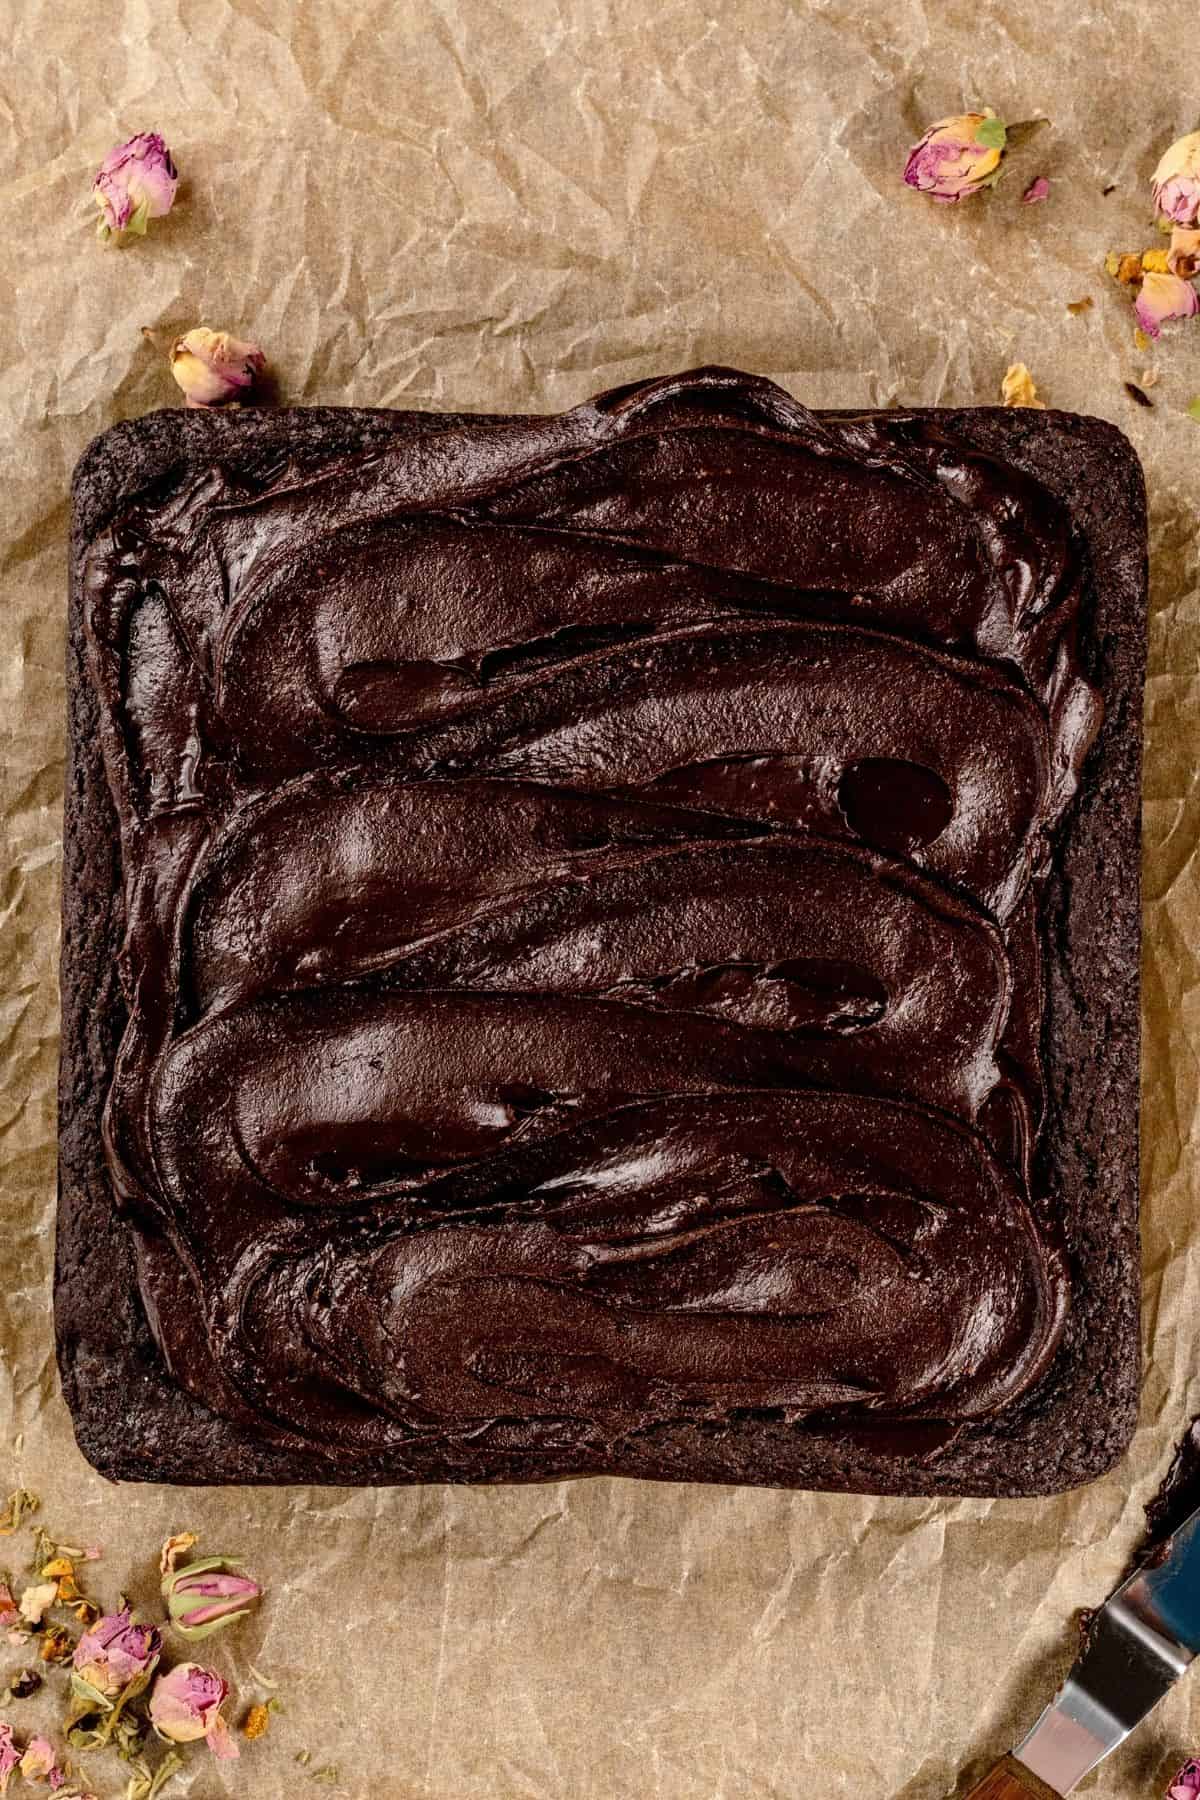 A batch of brownies on crinkled parchment paper with rose petals scattered around. An offset spatula is in the lower right corner. Thick chocolate frosting covers the brownies.